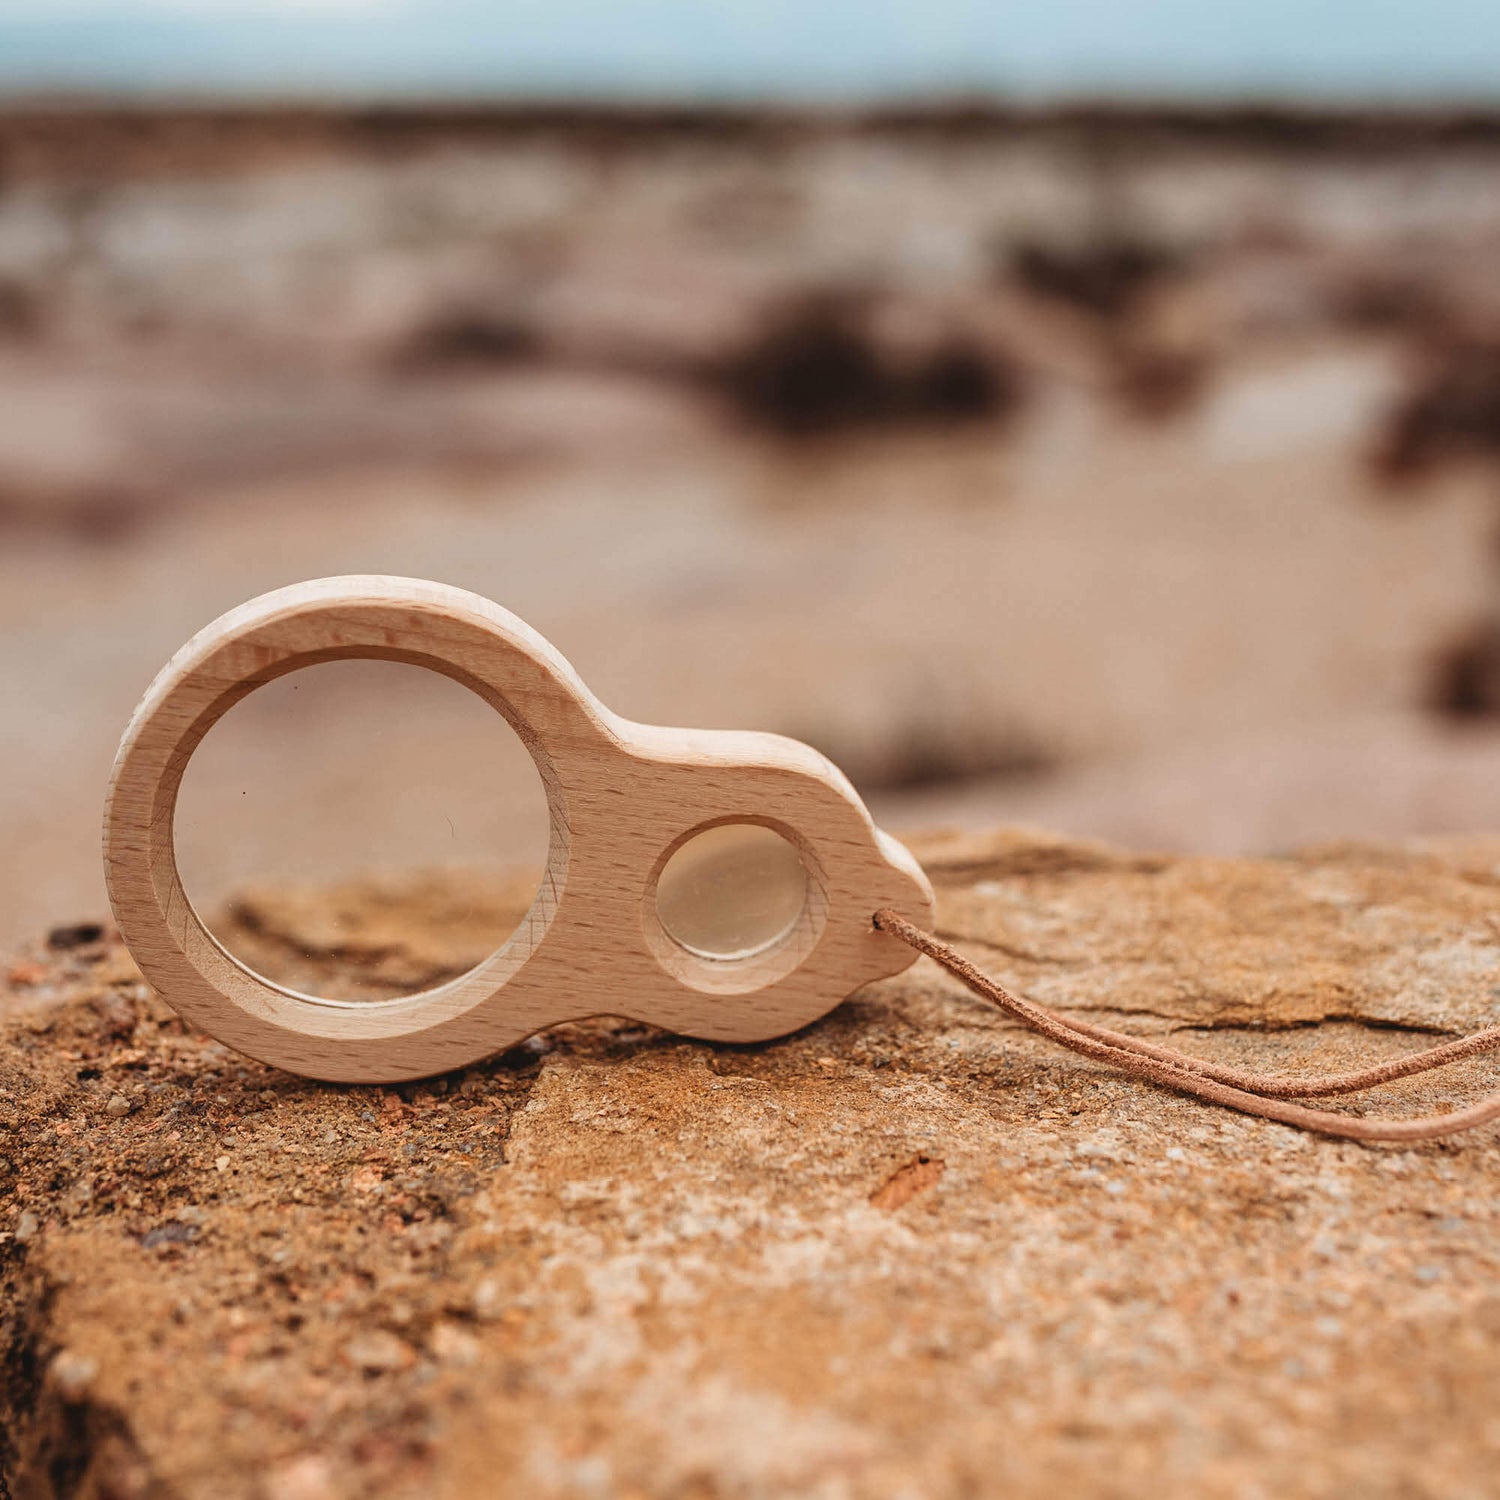 Kikkerland dual magnifier wooden magnifying glass with two lenses for exploring nature and play at the beach  from Your Wild Books